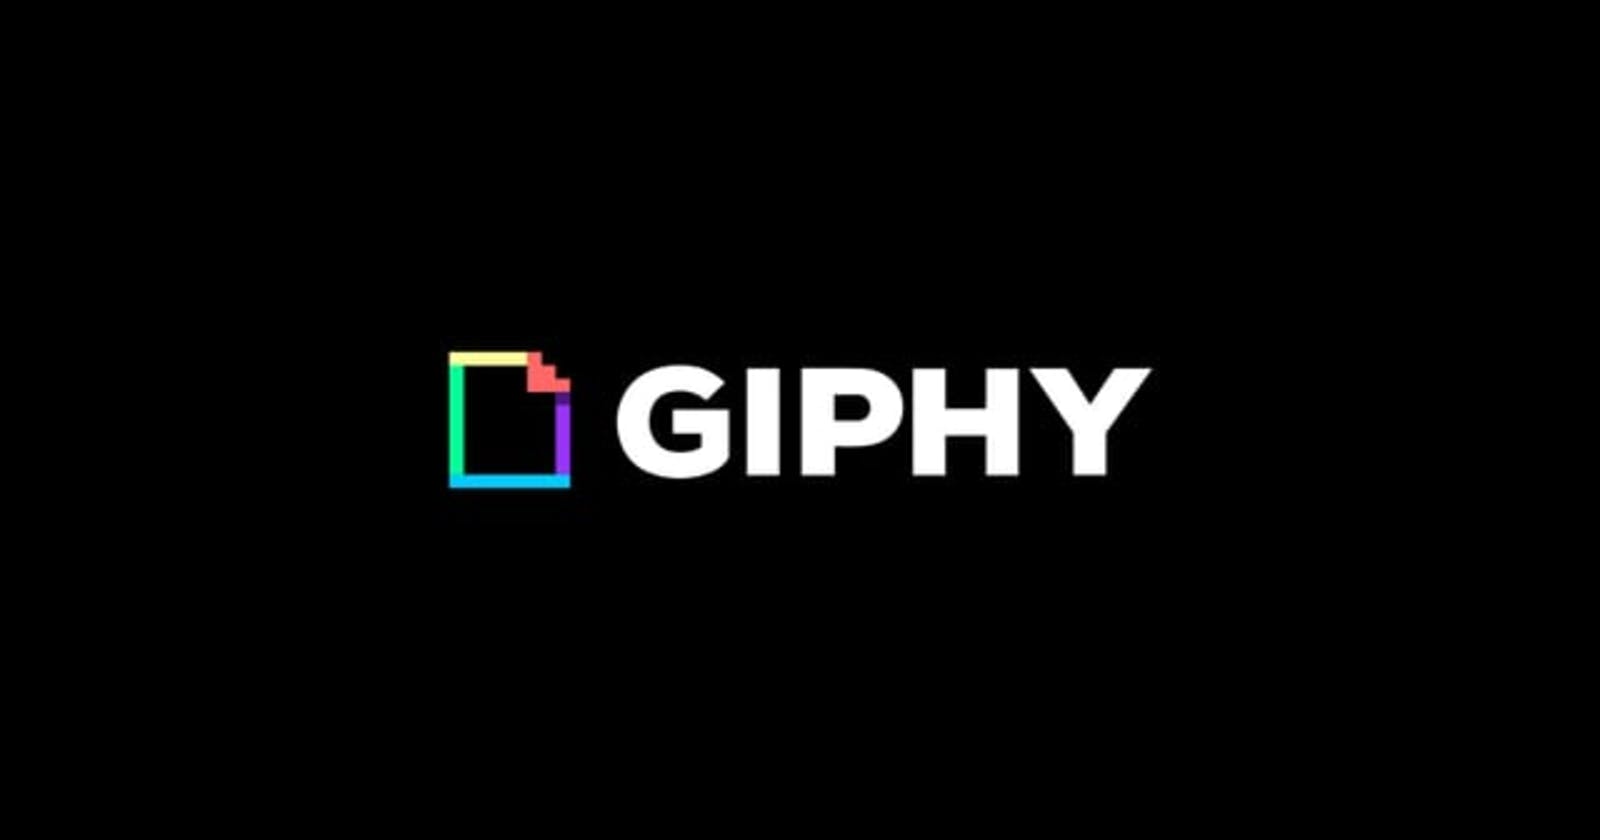 Deconstructing the fast rate of content served by GIPHY